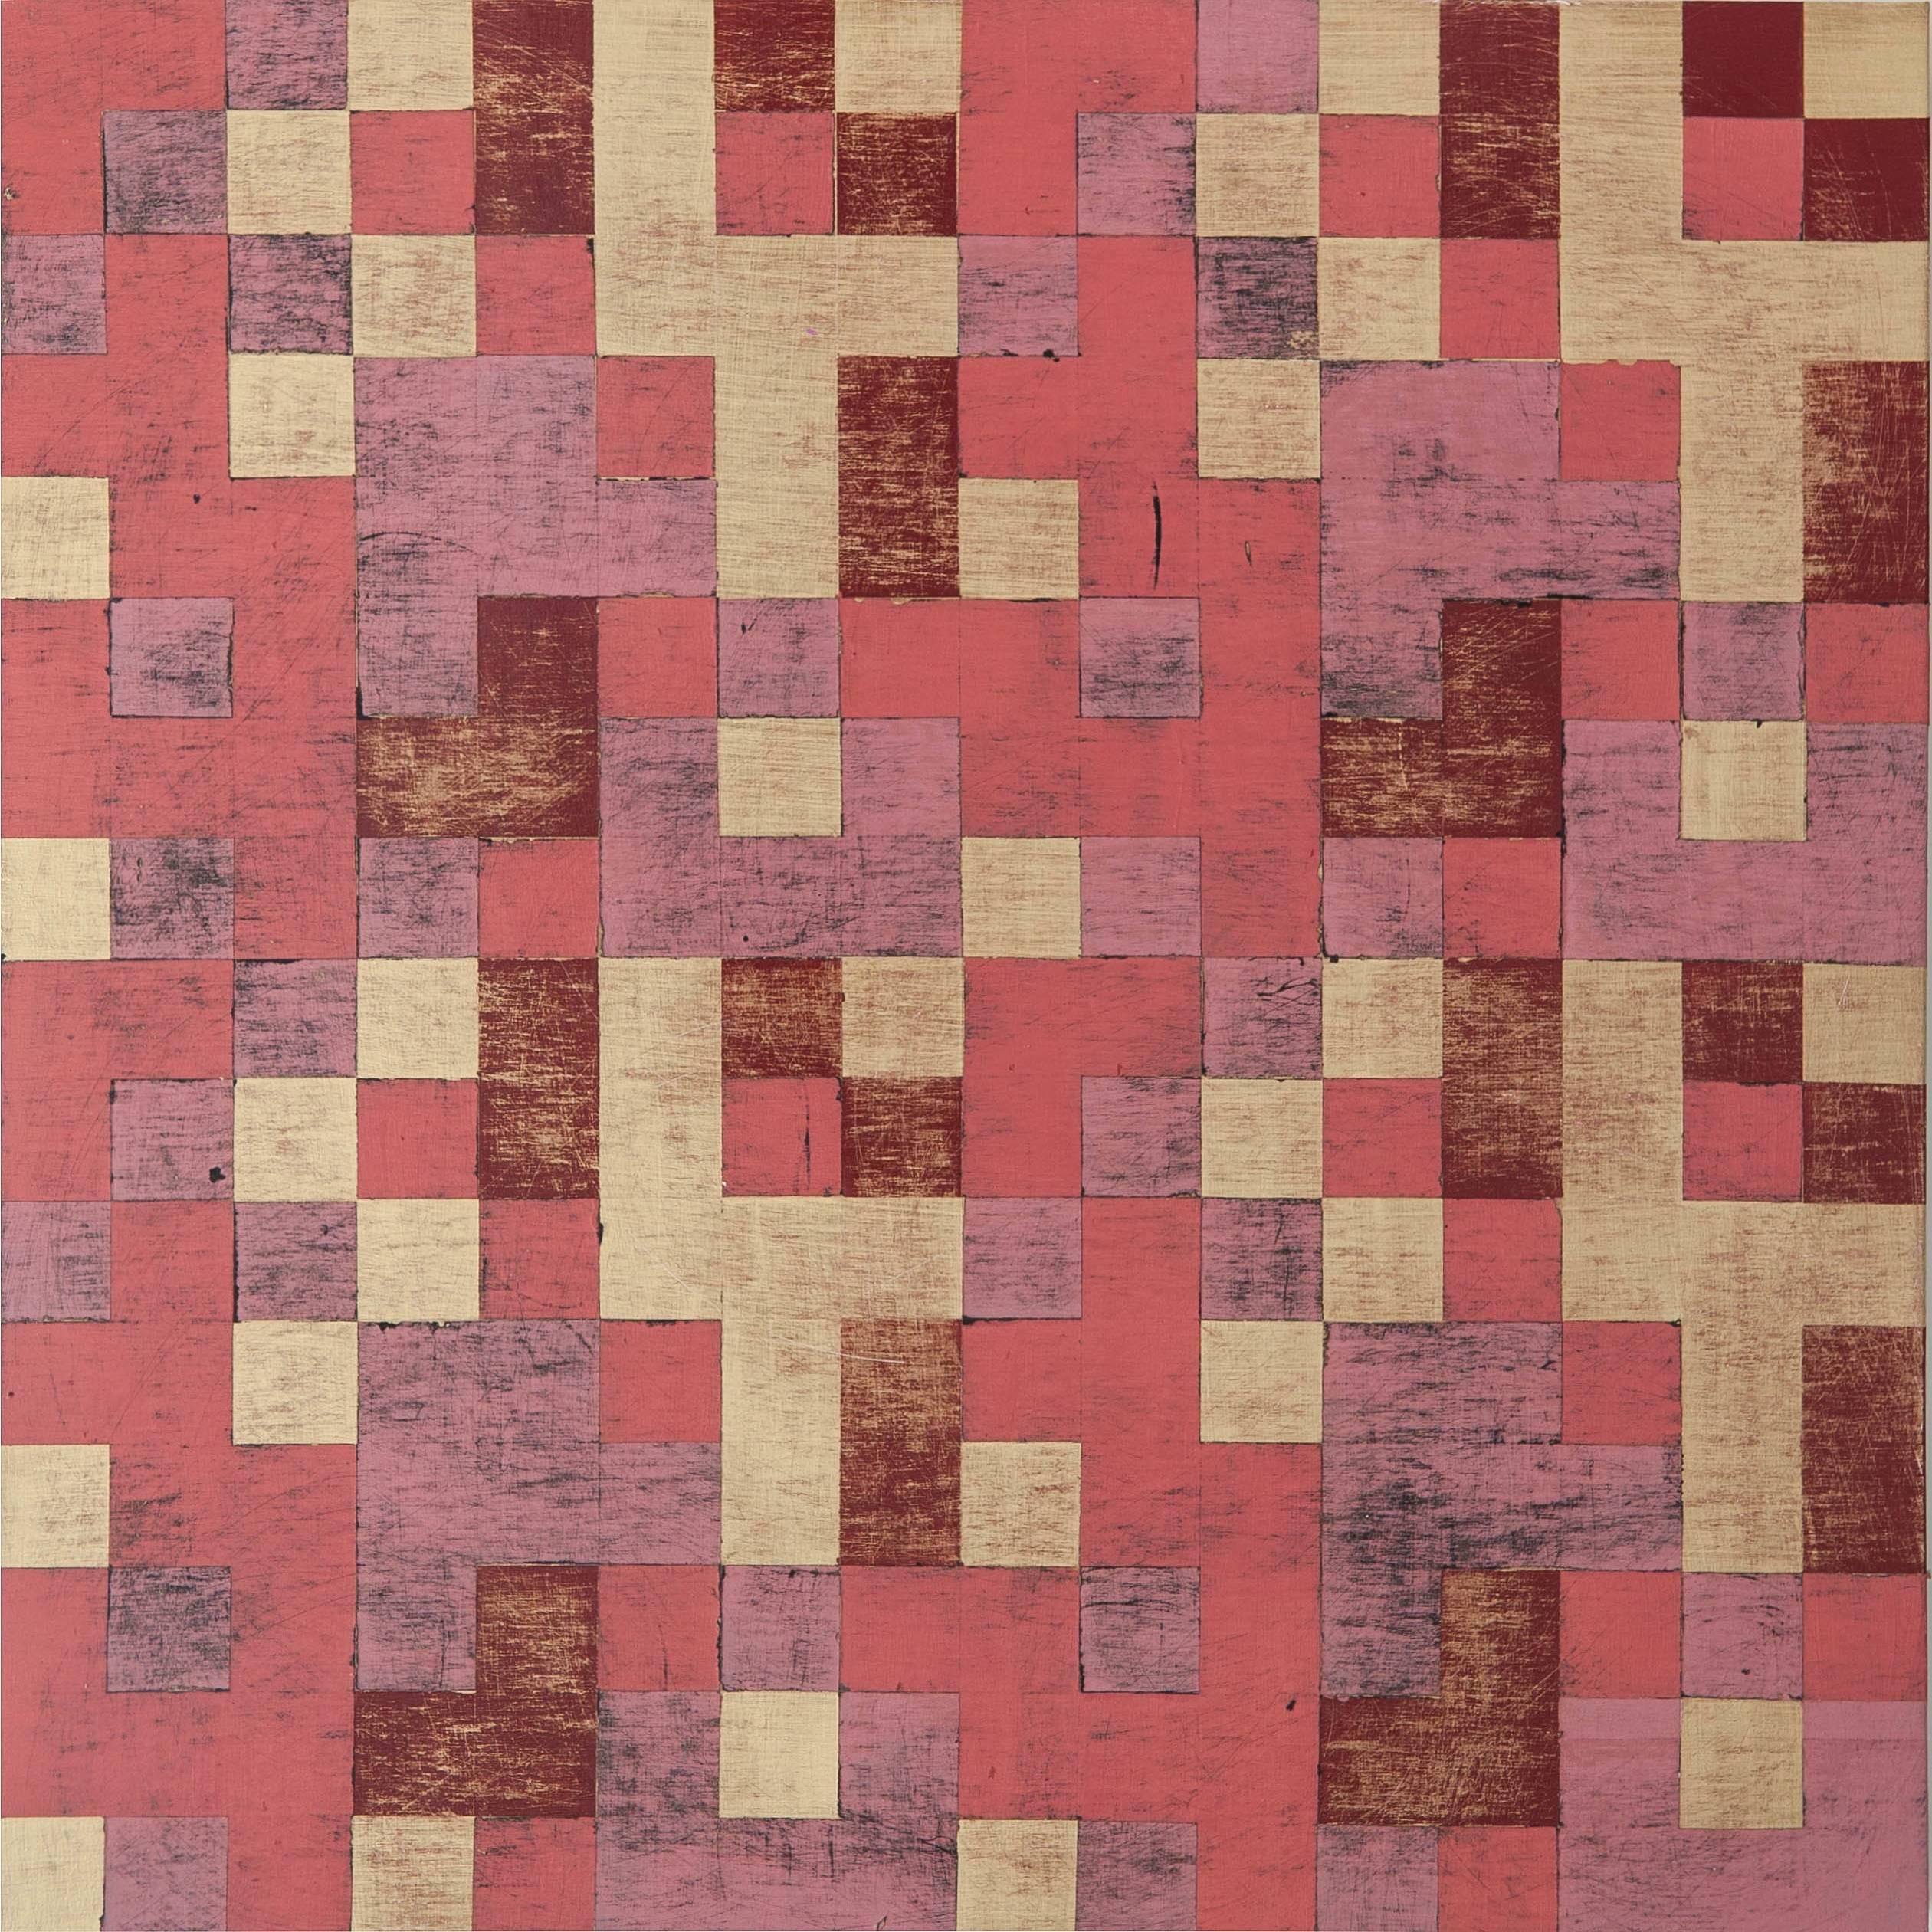 Denise Driscoll Abstract Painting - "Replication 1", abstract, geometric, squares, rose, gold, acrylic painting